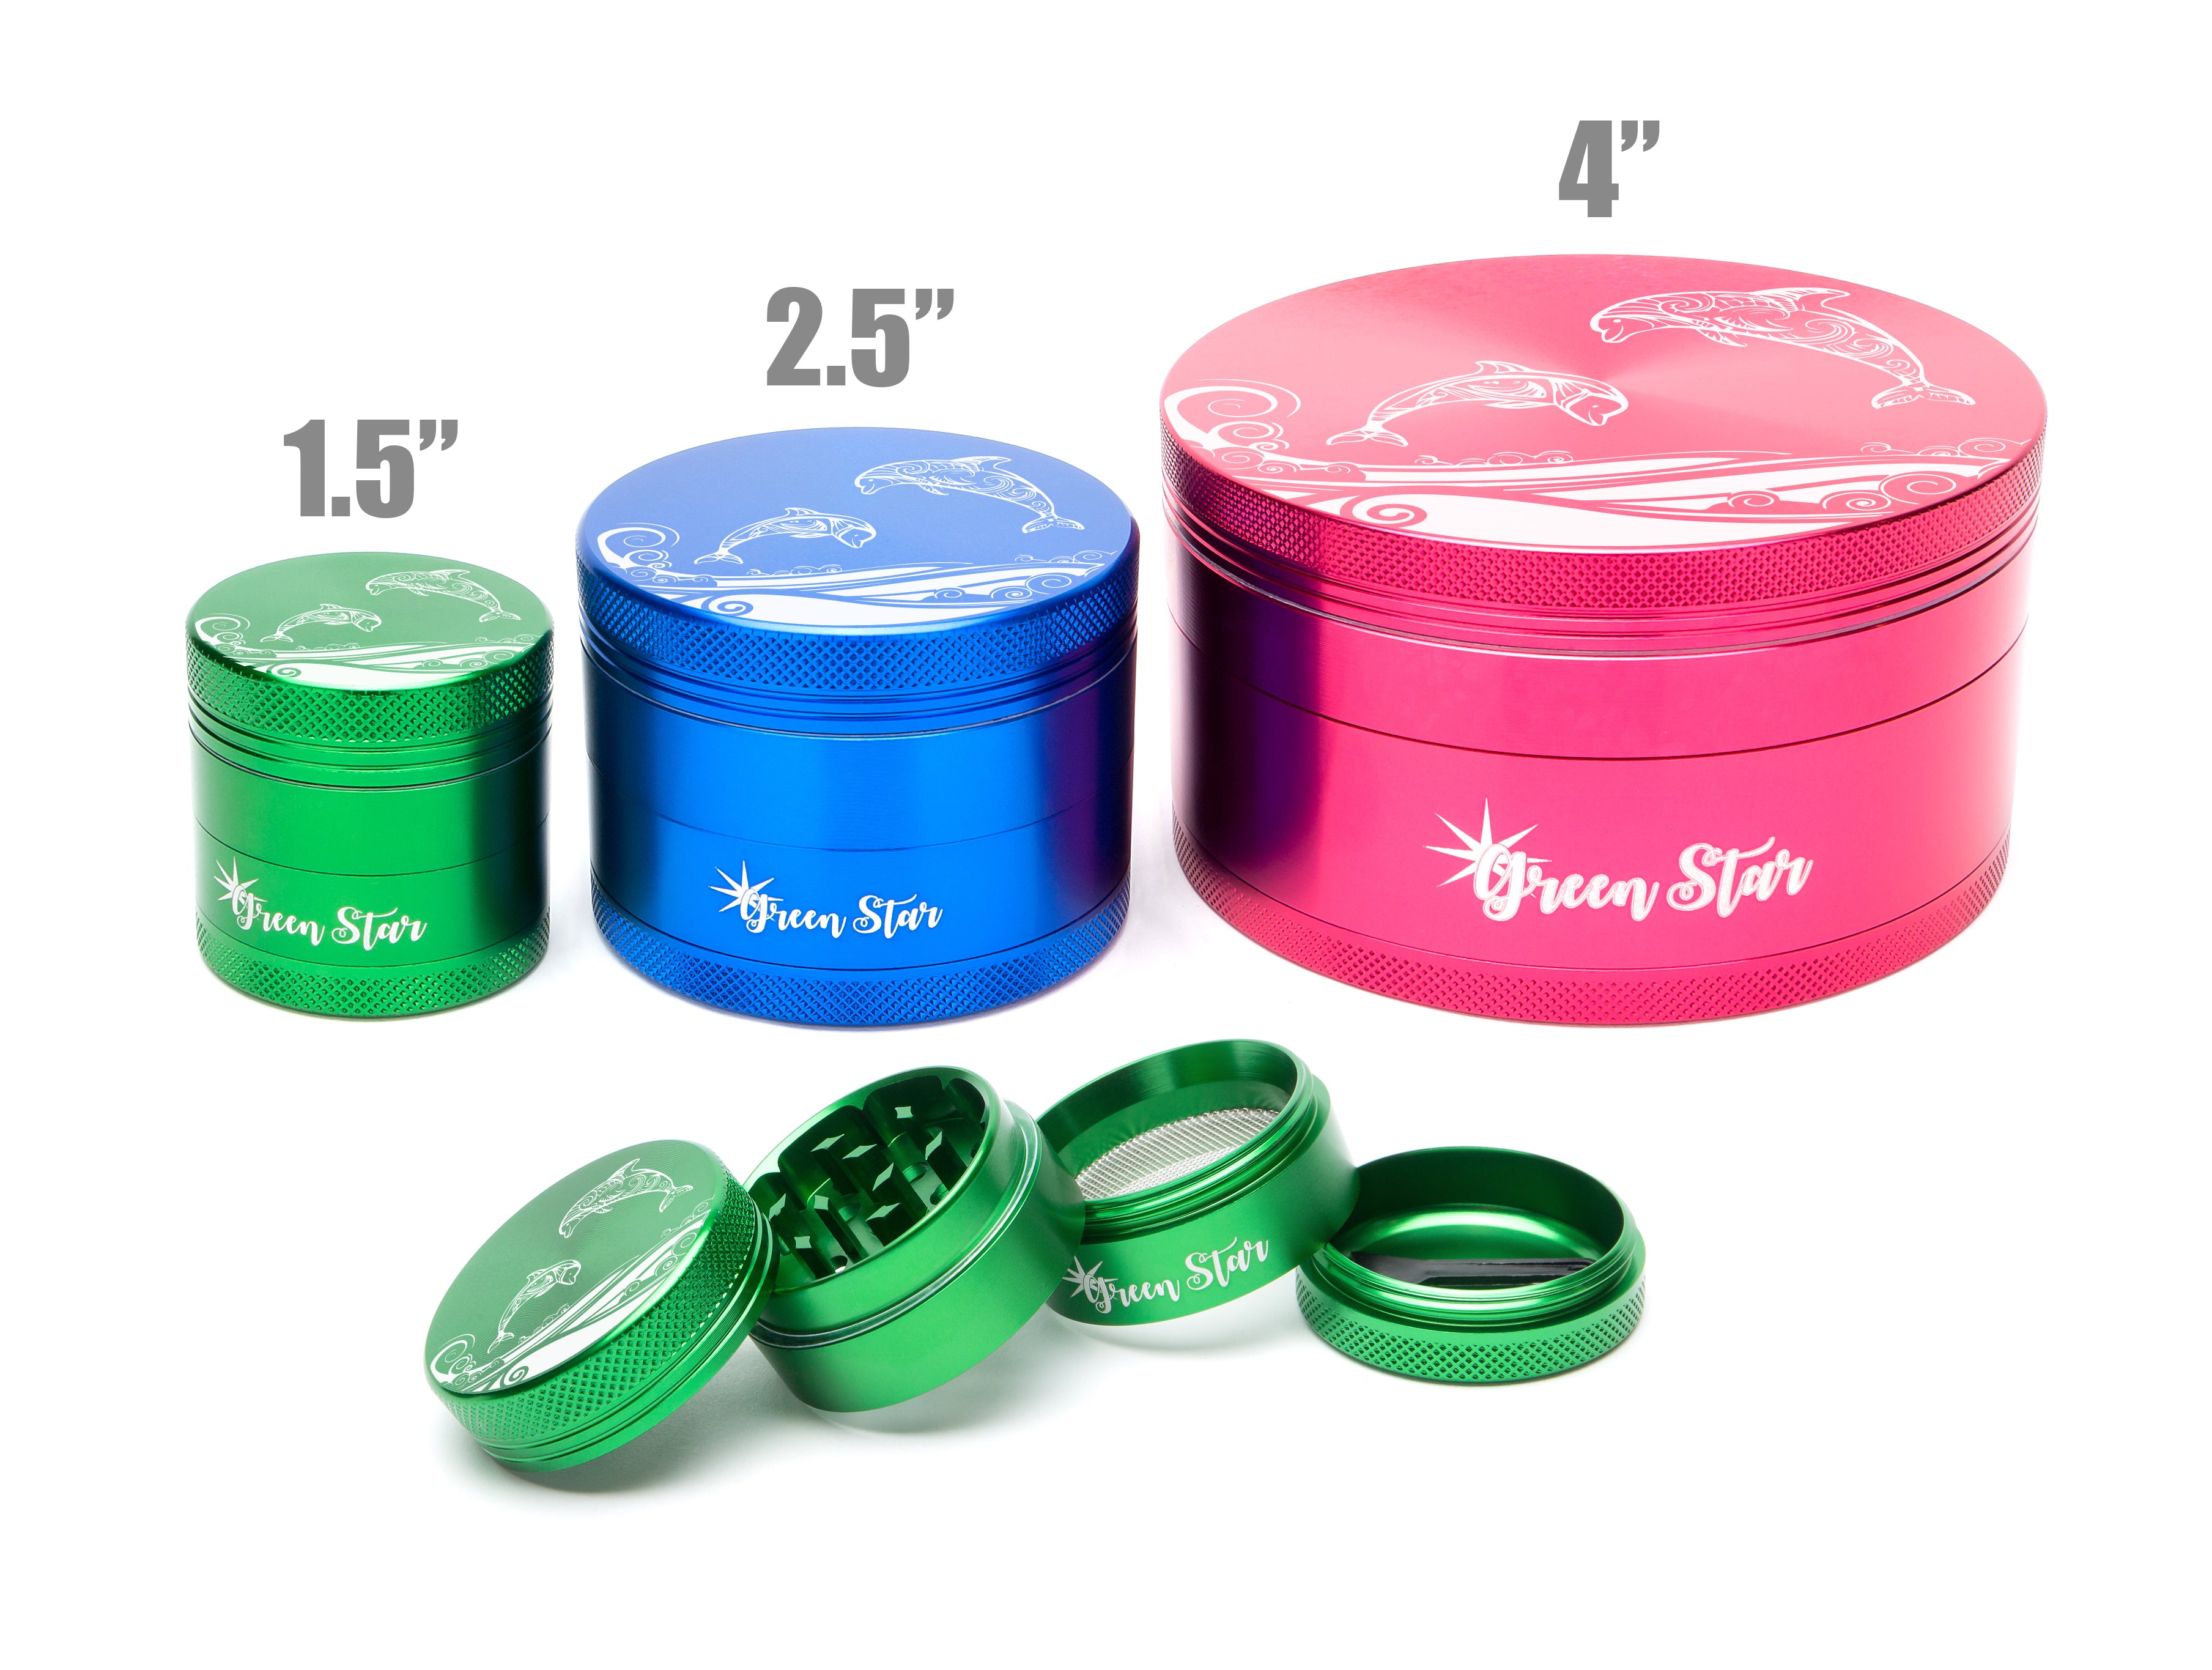 1.5" (40mm) 4-Piece Grinder with Dolphins Design